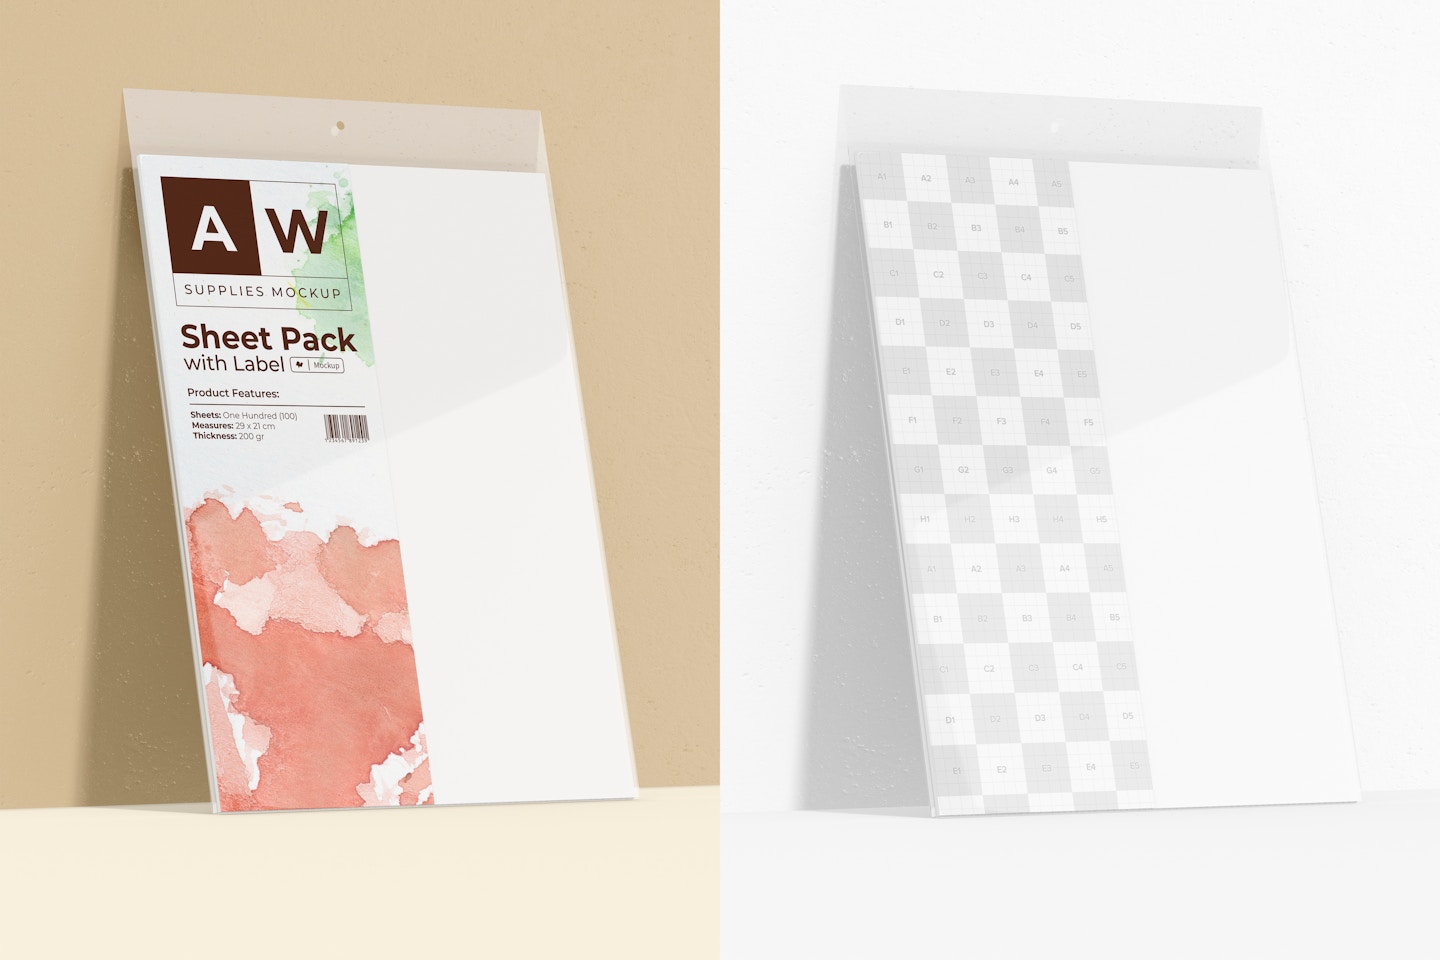 Sheet Pack with Label Mockup, Leaned